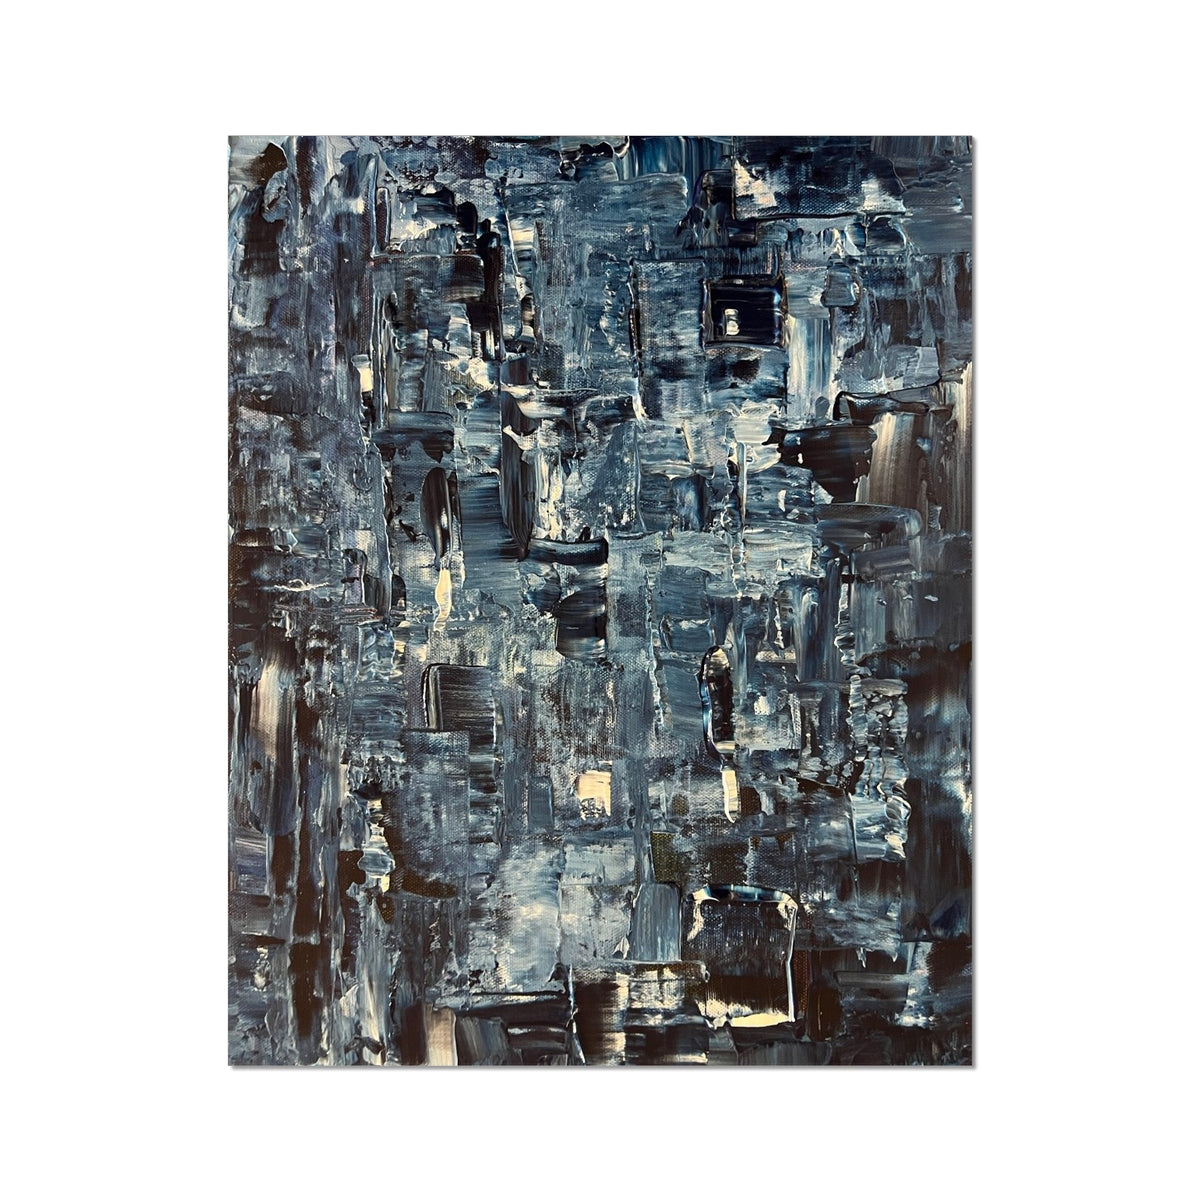 Inception Abstract Painting | Artist Proof Collector Prints From Scotland-Artist Proof Collector Prints-Abstract & Impressionistic Art Gallery-16"x20"-Paintings, Prints, Homeware, Art Gifts From Scotland By Scottish Artist Kevin Hunter